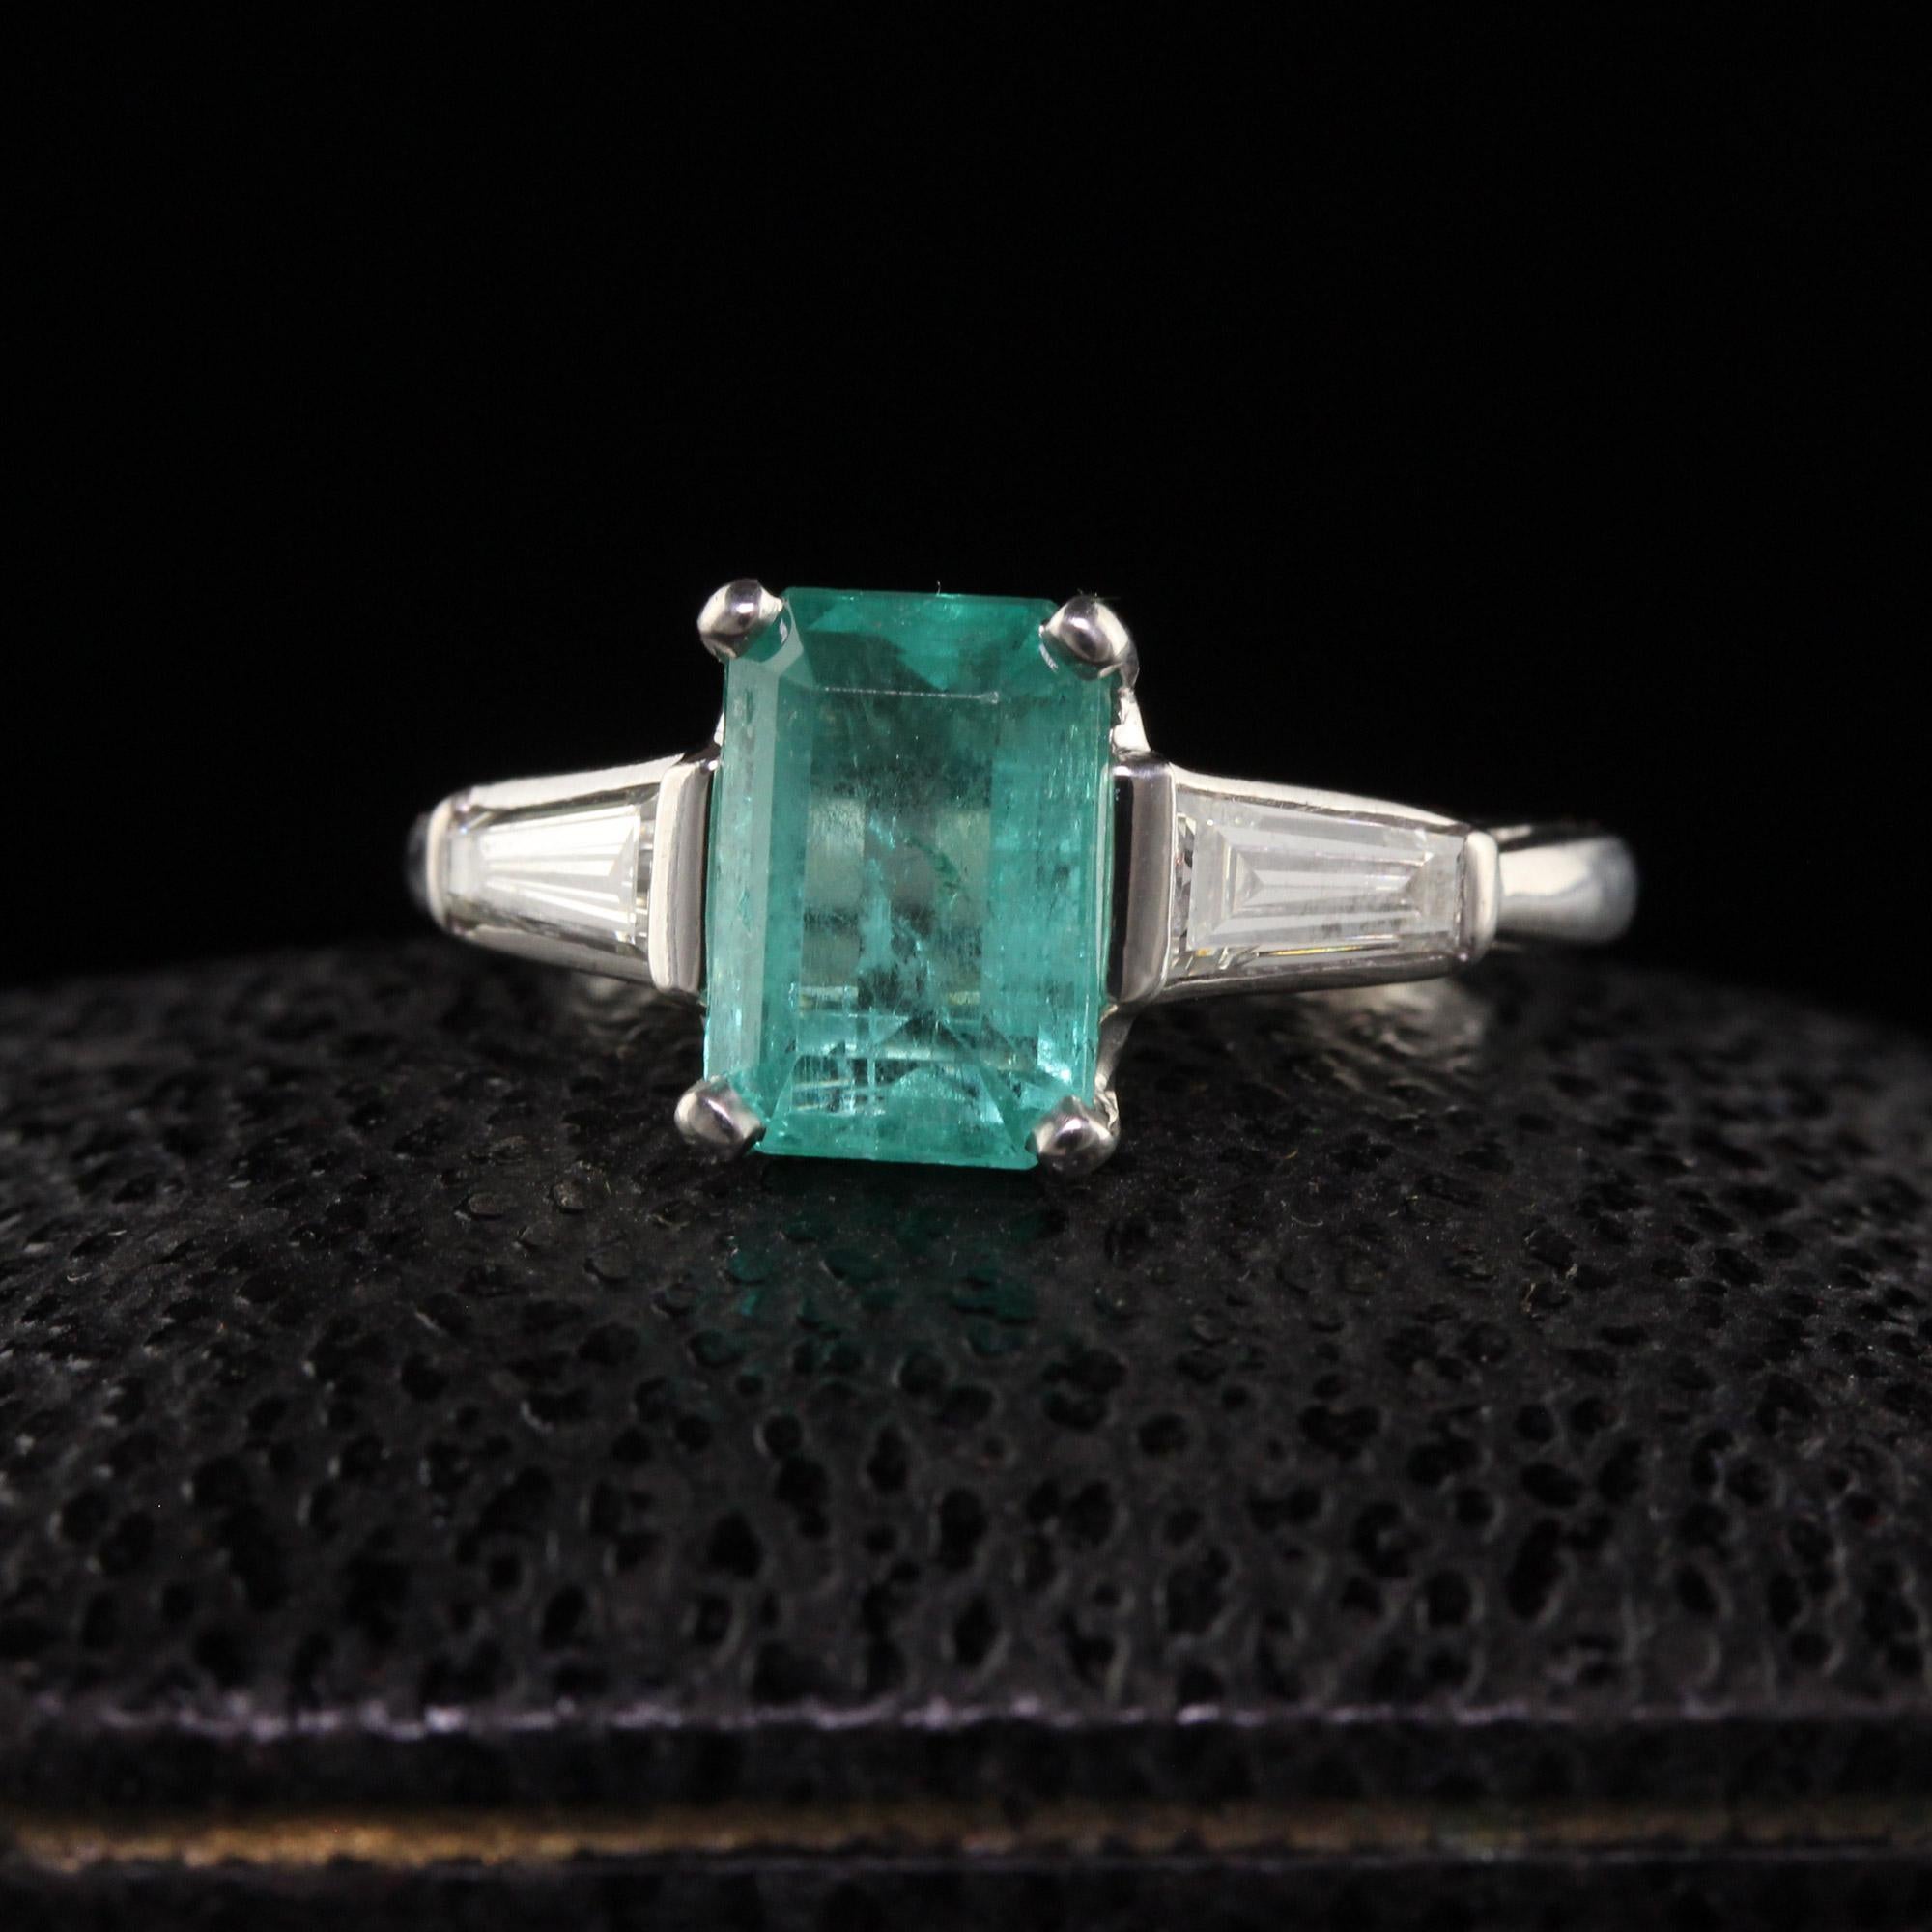 Beautiful Vintage Platinum Colombian Emerald Diamond Baguette Engagement Ring. This beautiful engagement ring is crafted in platinum. The center holds a natural colombian emerald and has large baguette diamonds on each side. The emerald is a